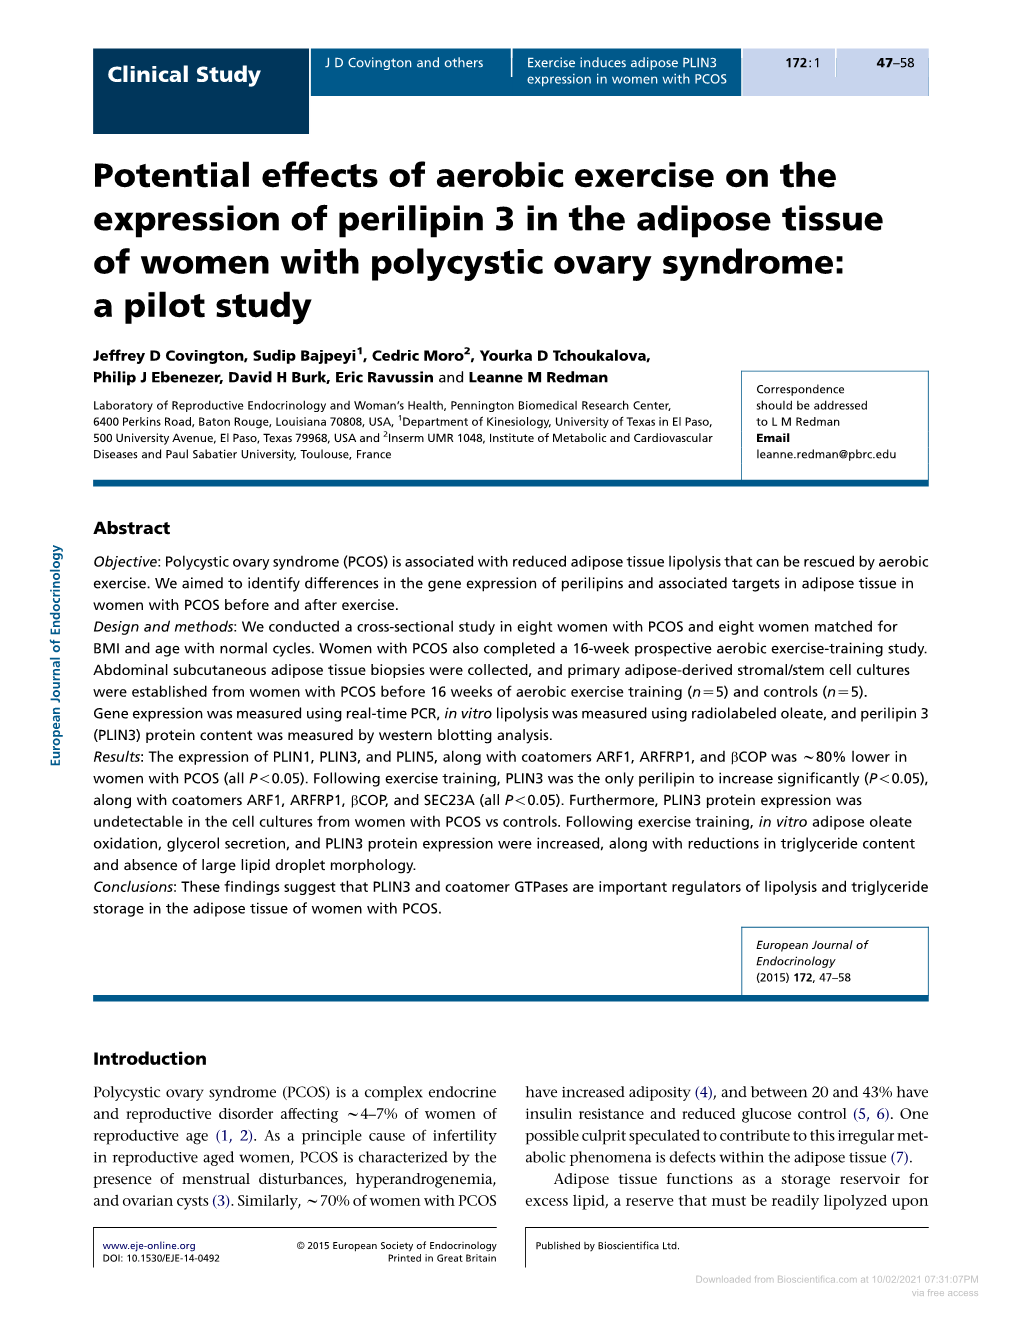 Potential Effects of Aerobic Exercise on the Expression of Perilipin 3 in the Adipose Tissue of Women with Polycystic Ovary Syndrome: a Pilot Study